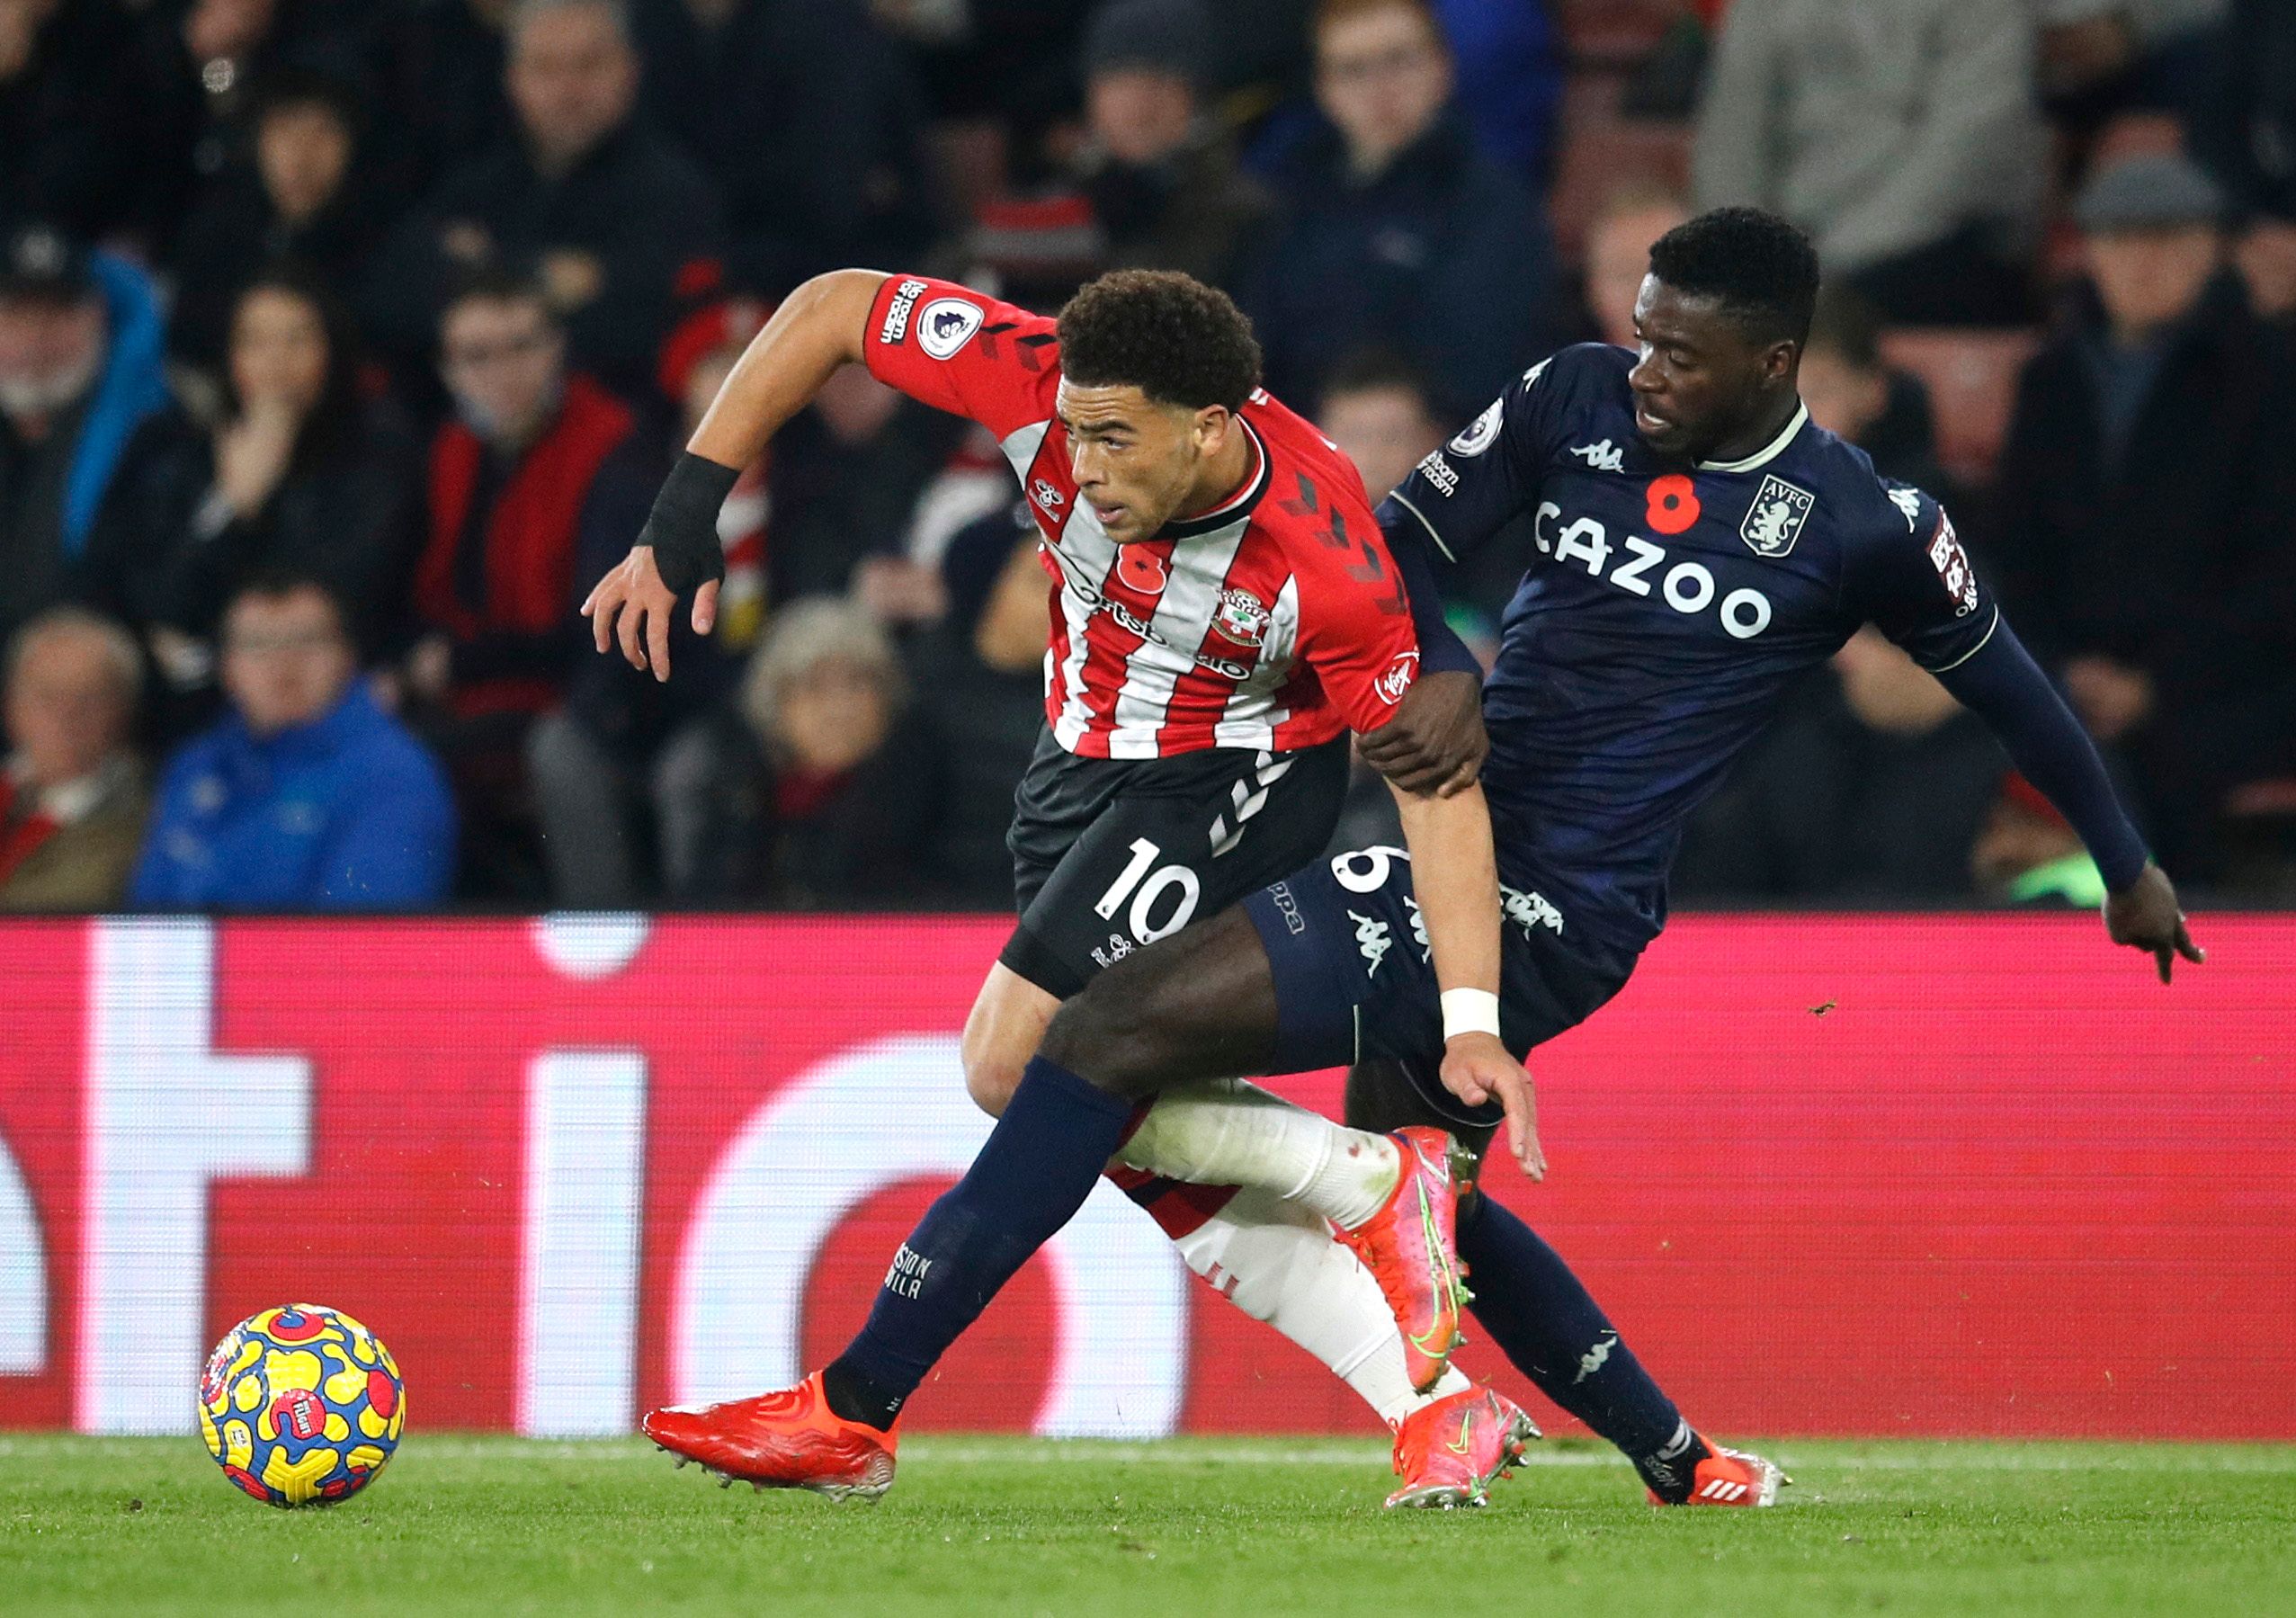 Leeds: Orta made D-day blunder on Tuanzebe